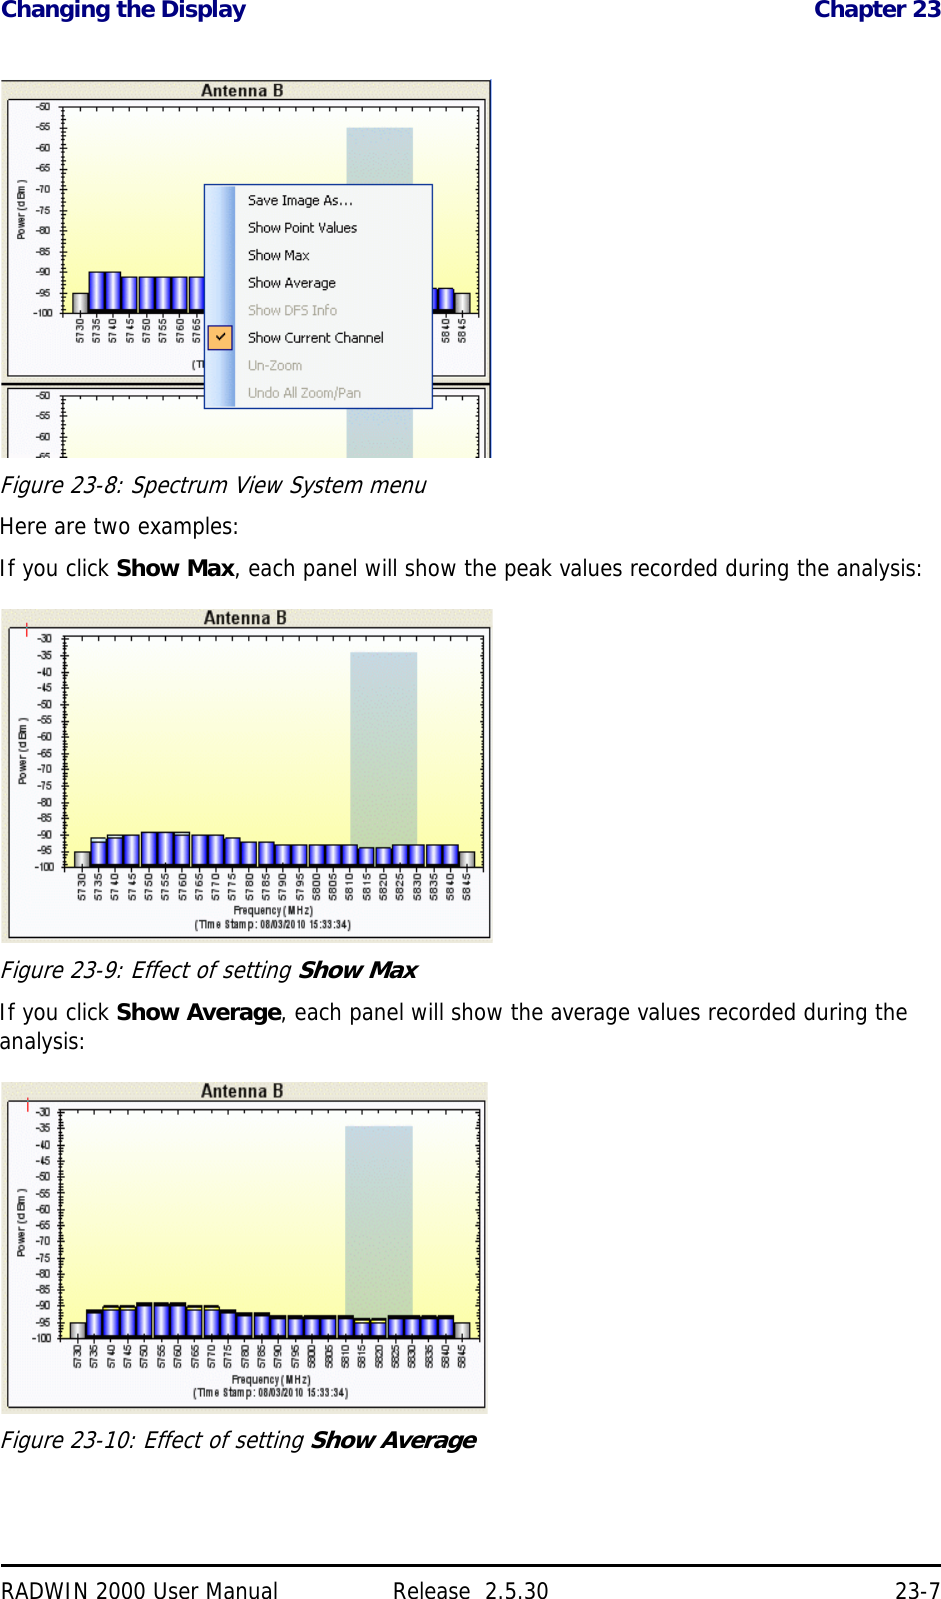 Changing the Display Chapter 23RADWIN 2000 User Manual Release  2.5.30 23-7Figure 23-8: Spectrum View System menuHere are two examples:If you click Show Max, each panel will show the peak values recorded during the analysis:Figure 23-9: Effect of setting Show MaxIf you click Show Average, each panel will show the average values recorded during the analysis:Figure 23-10: Effect of setting Show Average